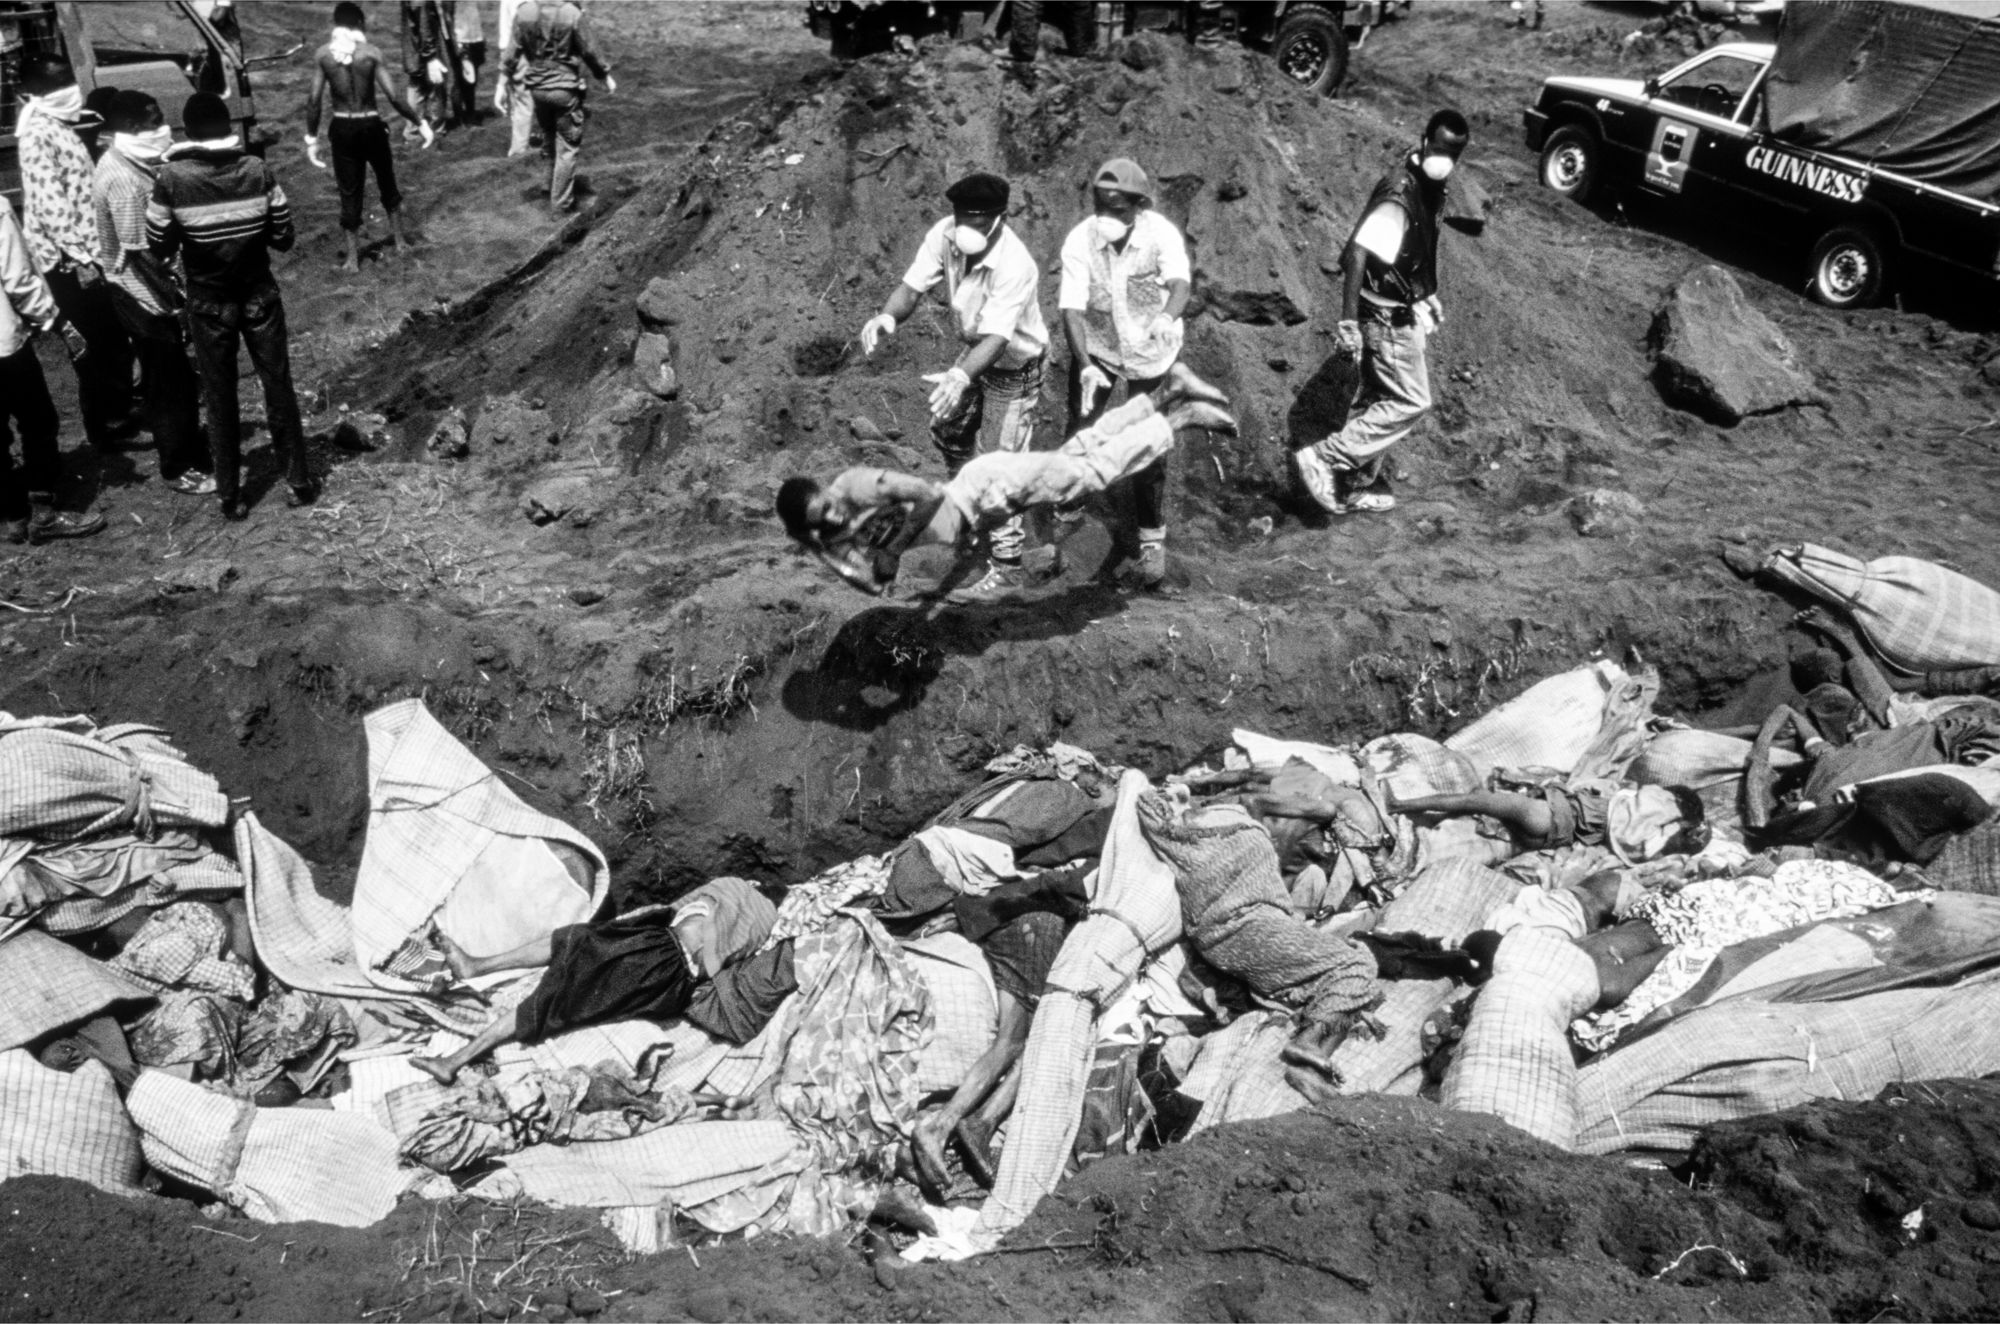 Victims of the cholera epidemic are buried in a mass grave in a refugee camp, 1994. AKG8010691